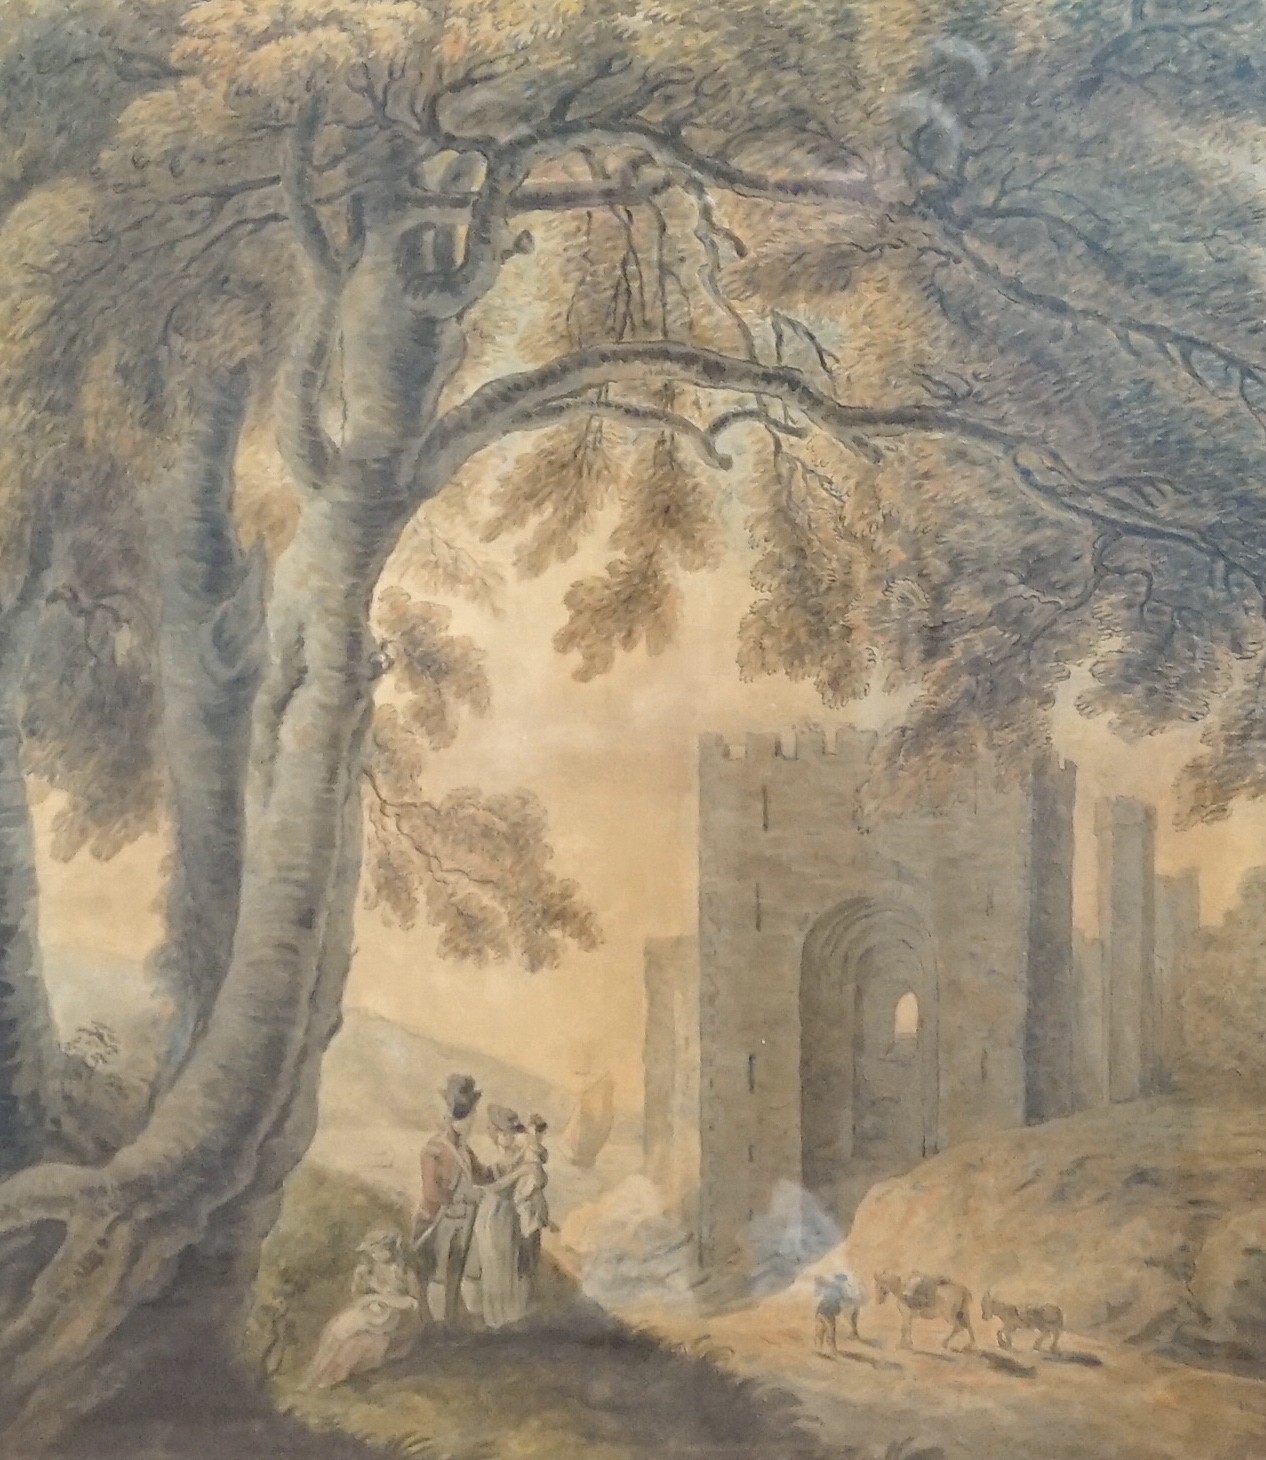 English School c.1800, ink and watercolour, An army officer and his family standing in a landscape with a castle and sailing ship beyond, 60 x 52cm